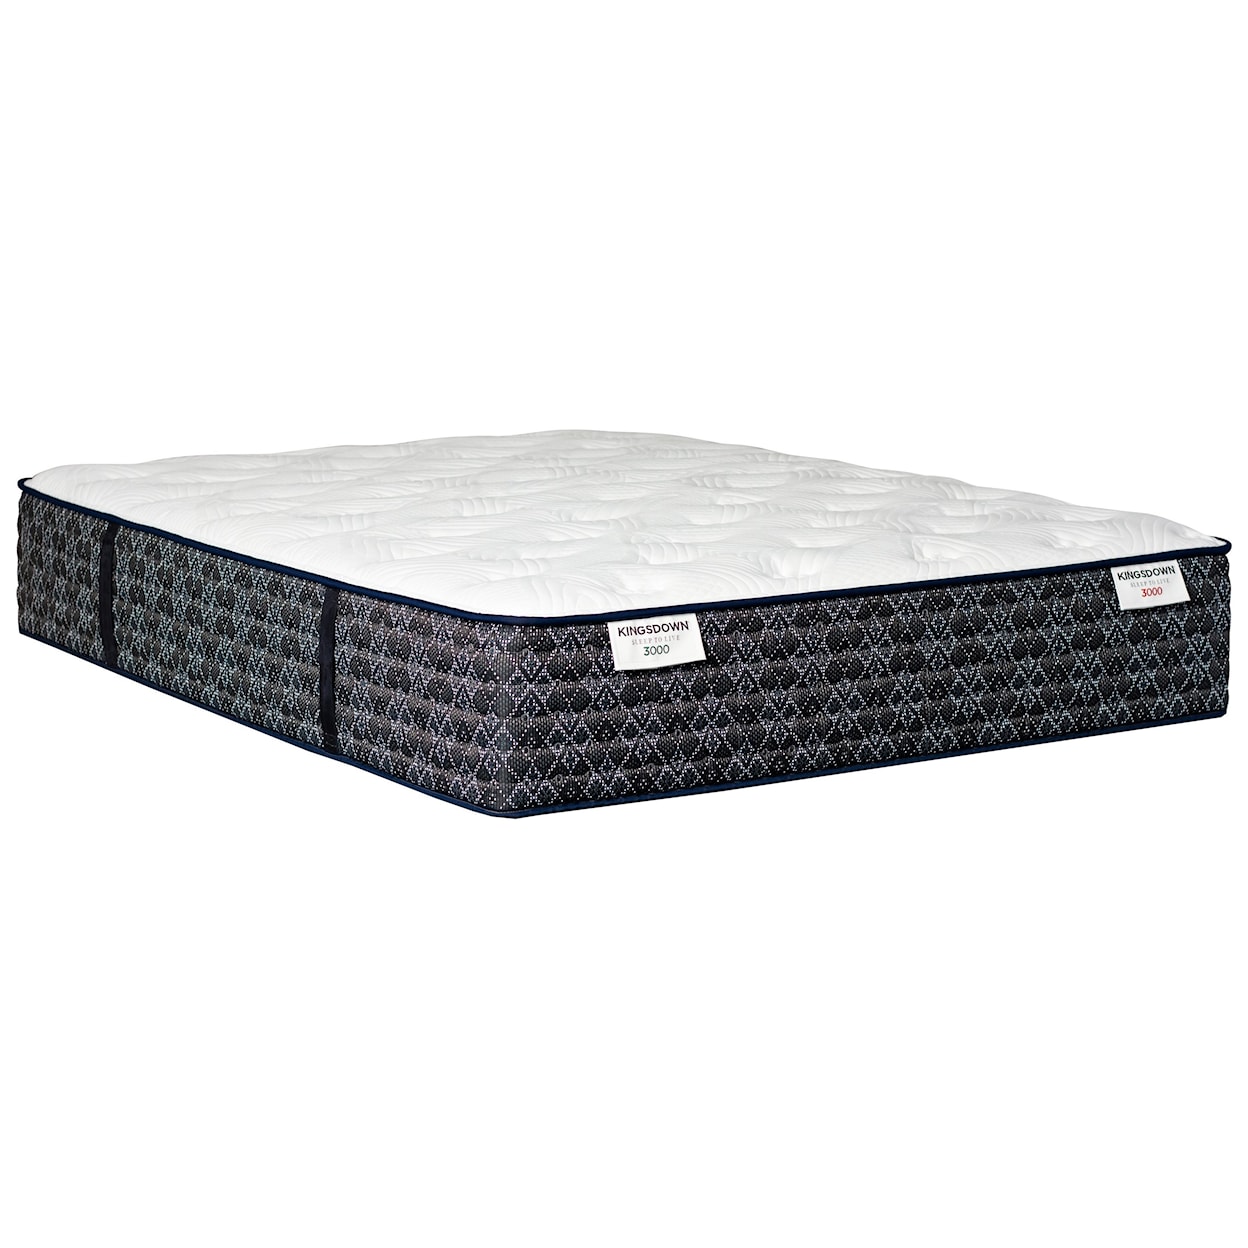 Kingsdown Sleep to Live 3000 Gold Blue King Pocketed Coil Mattress